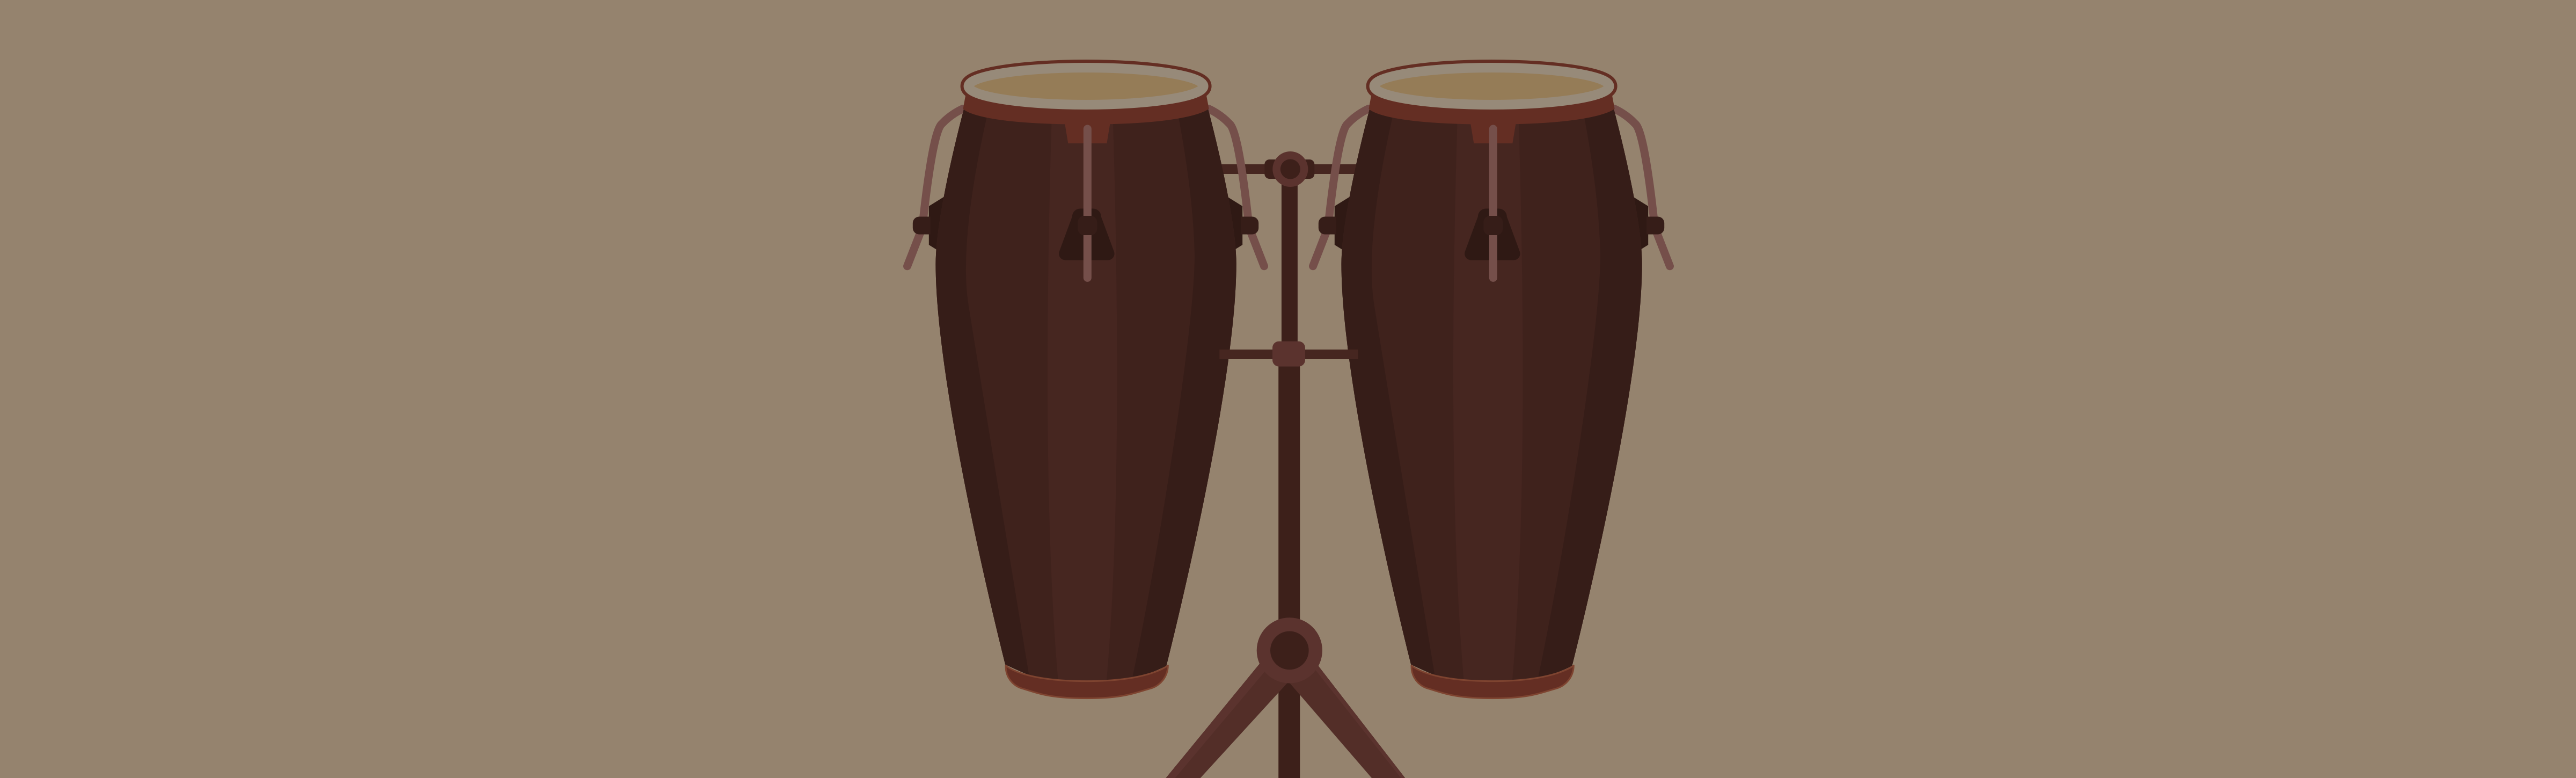 Congas Or Conga Drums: Overview, History, & Types - ipassio Wiki